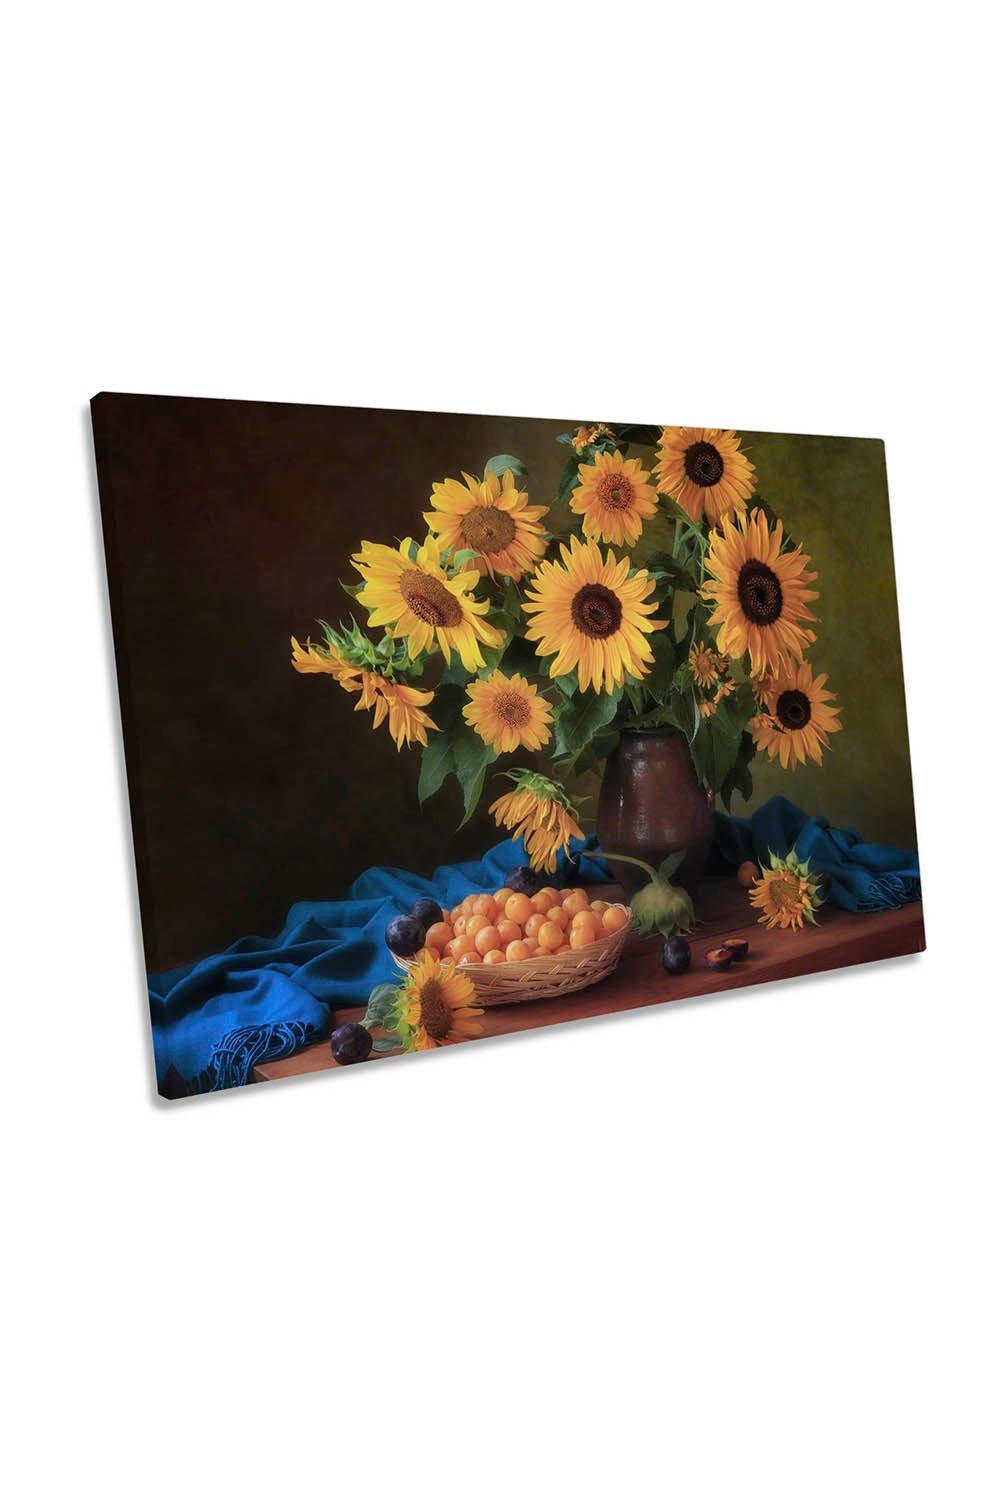 Sunflowers and Fruits Sill Life Floral Canvas Wall Art Picture Print